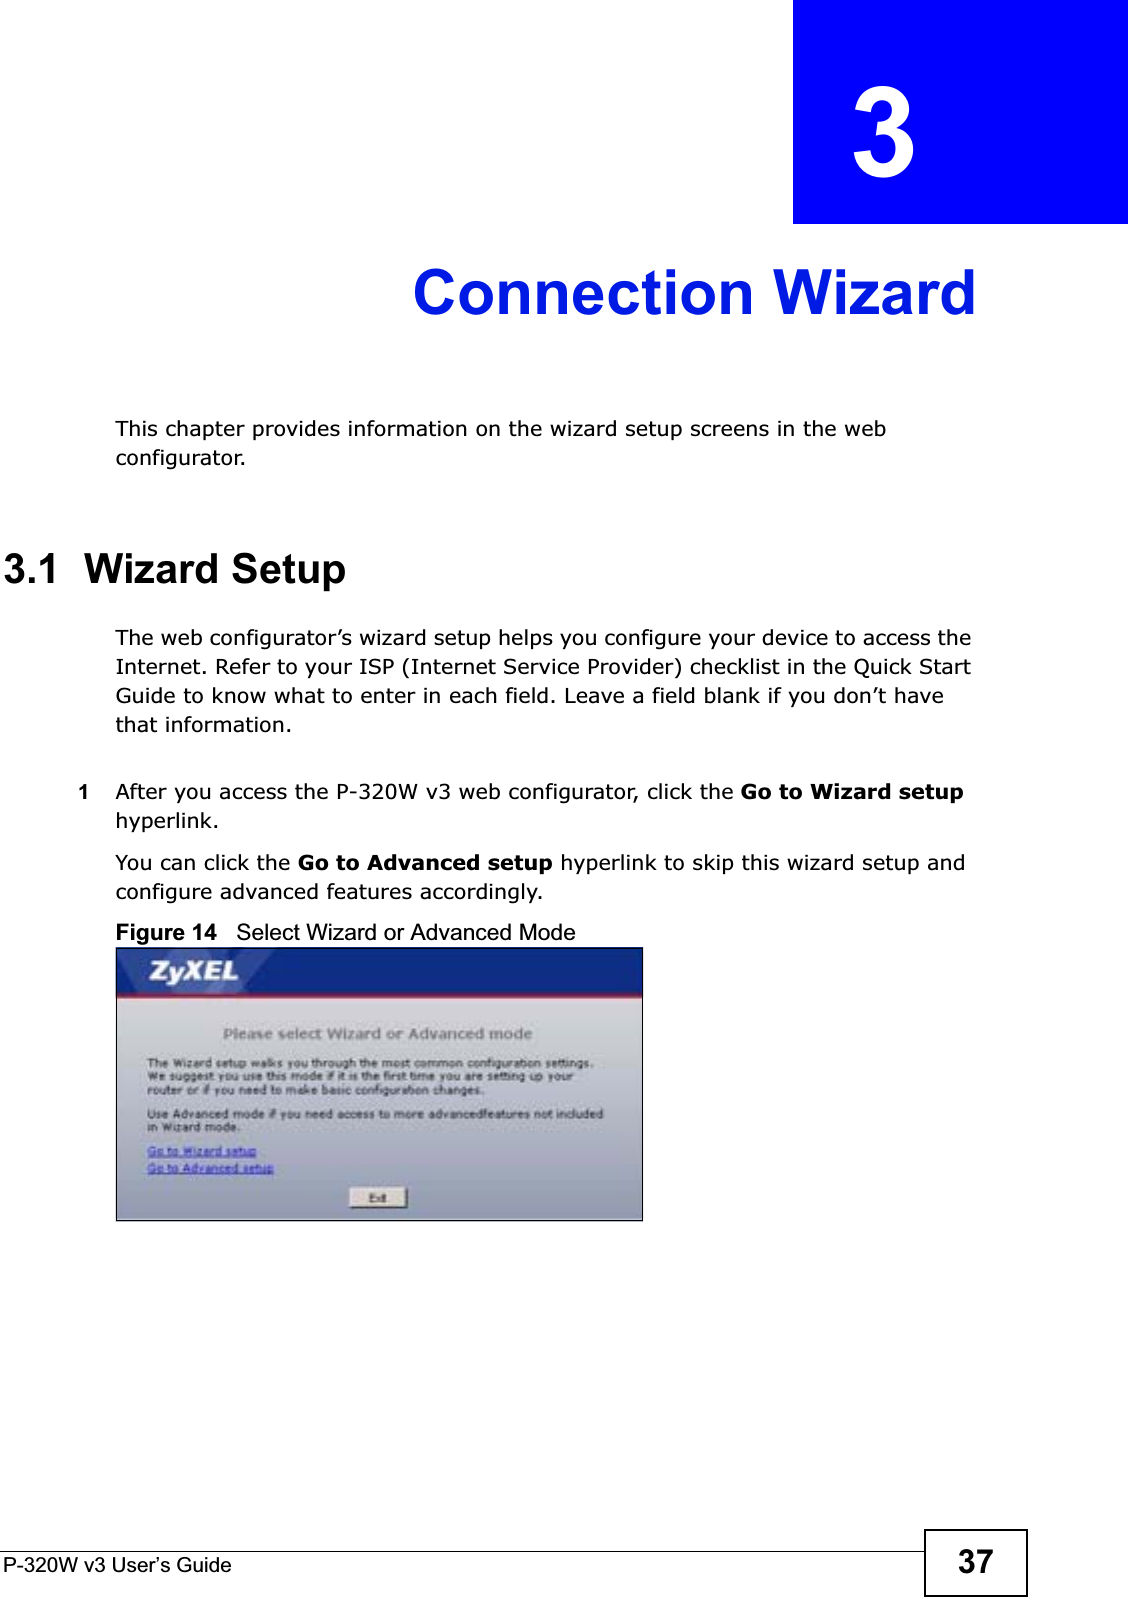 P-320W v3 User’s Guide 37CHAPTER  3 Connection WizardThis chapter provides information on the wizard setup screens in the web configurator.3.1  Wizard SetupThe web configurator’s wizard setup helps you configure your device to access the Internet. Refer to your ISP (Internet Service Provider) checklist in the Quick Start Guide to know what to enter in each field. Leave a field blank if you don’t have that information.1After you access the P-320W v3 web configurator, click the Go to Wizard setuphyperlink.You can click the Go to Advanced setup hyperlink to skip this wizard setup and configure advanced features accordingly.Figure 14   Select Wizard or Advanced Mode